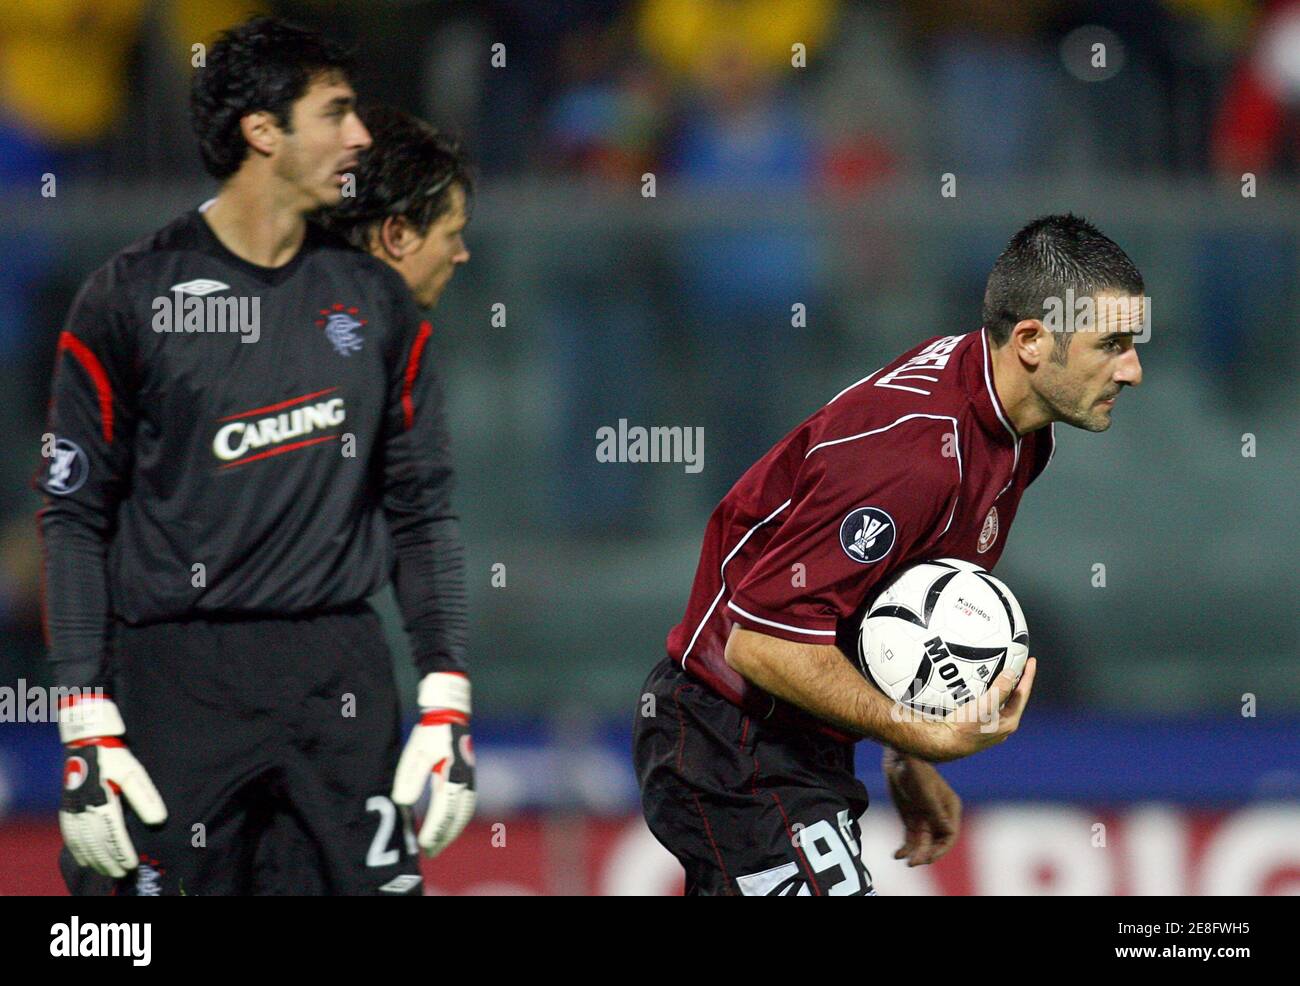 Livorno's Cristiano Lucarelli (R) celebrates after scoring as Rangers' goalkeeper Stefan Klos watches during their UEFA Cup Group A soccer match at the Armando Picchi Stadium in Livorno, October 19, 2006. Rangers won the match 3-2.     REUTERS/Giampiero Sposito (ITALY) Stock Photo